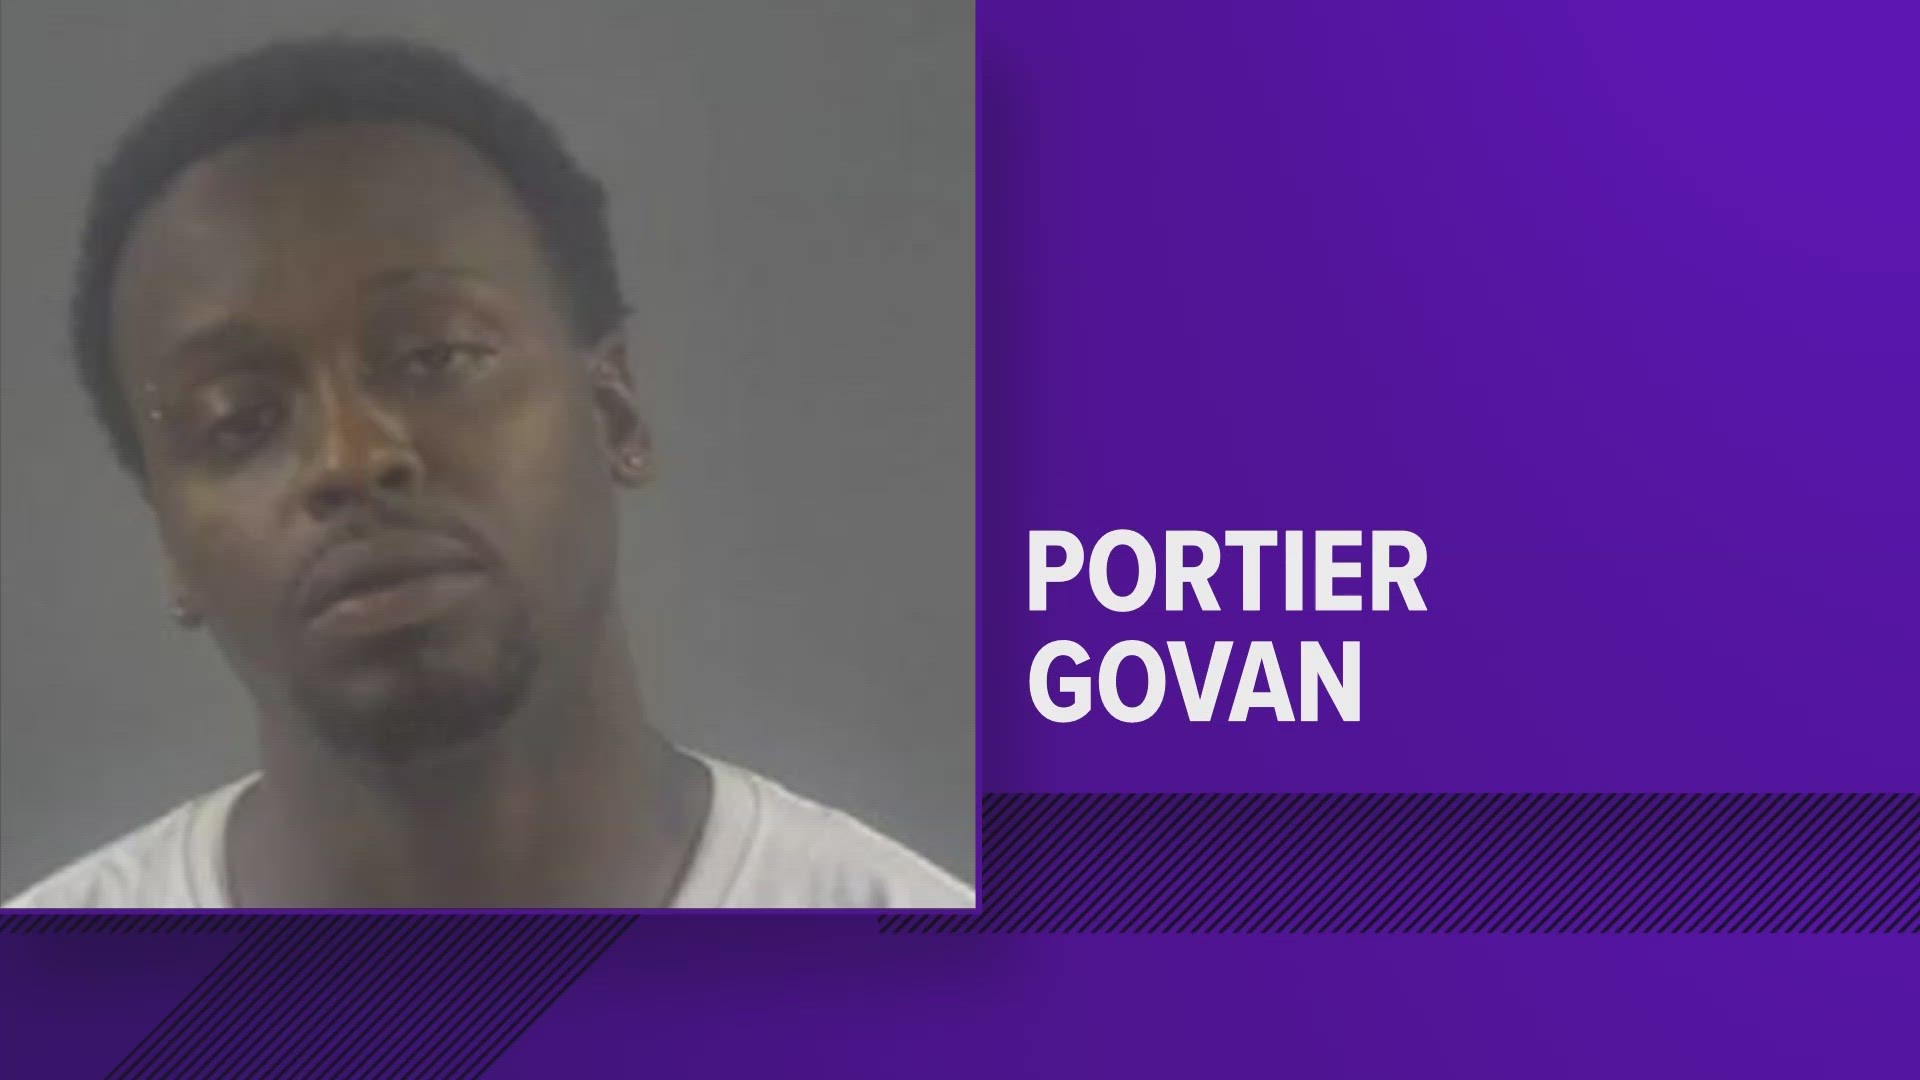 Federal prosecutors said Portier Govan forced a woman into prostitution, and Brittany Howard is accused of conspiring with him.